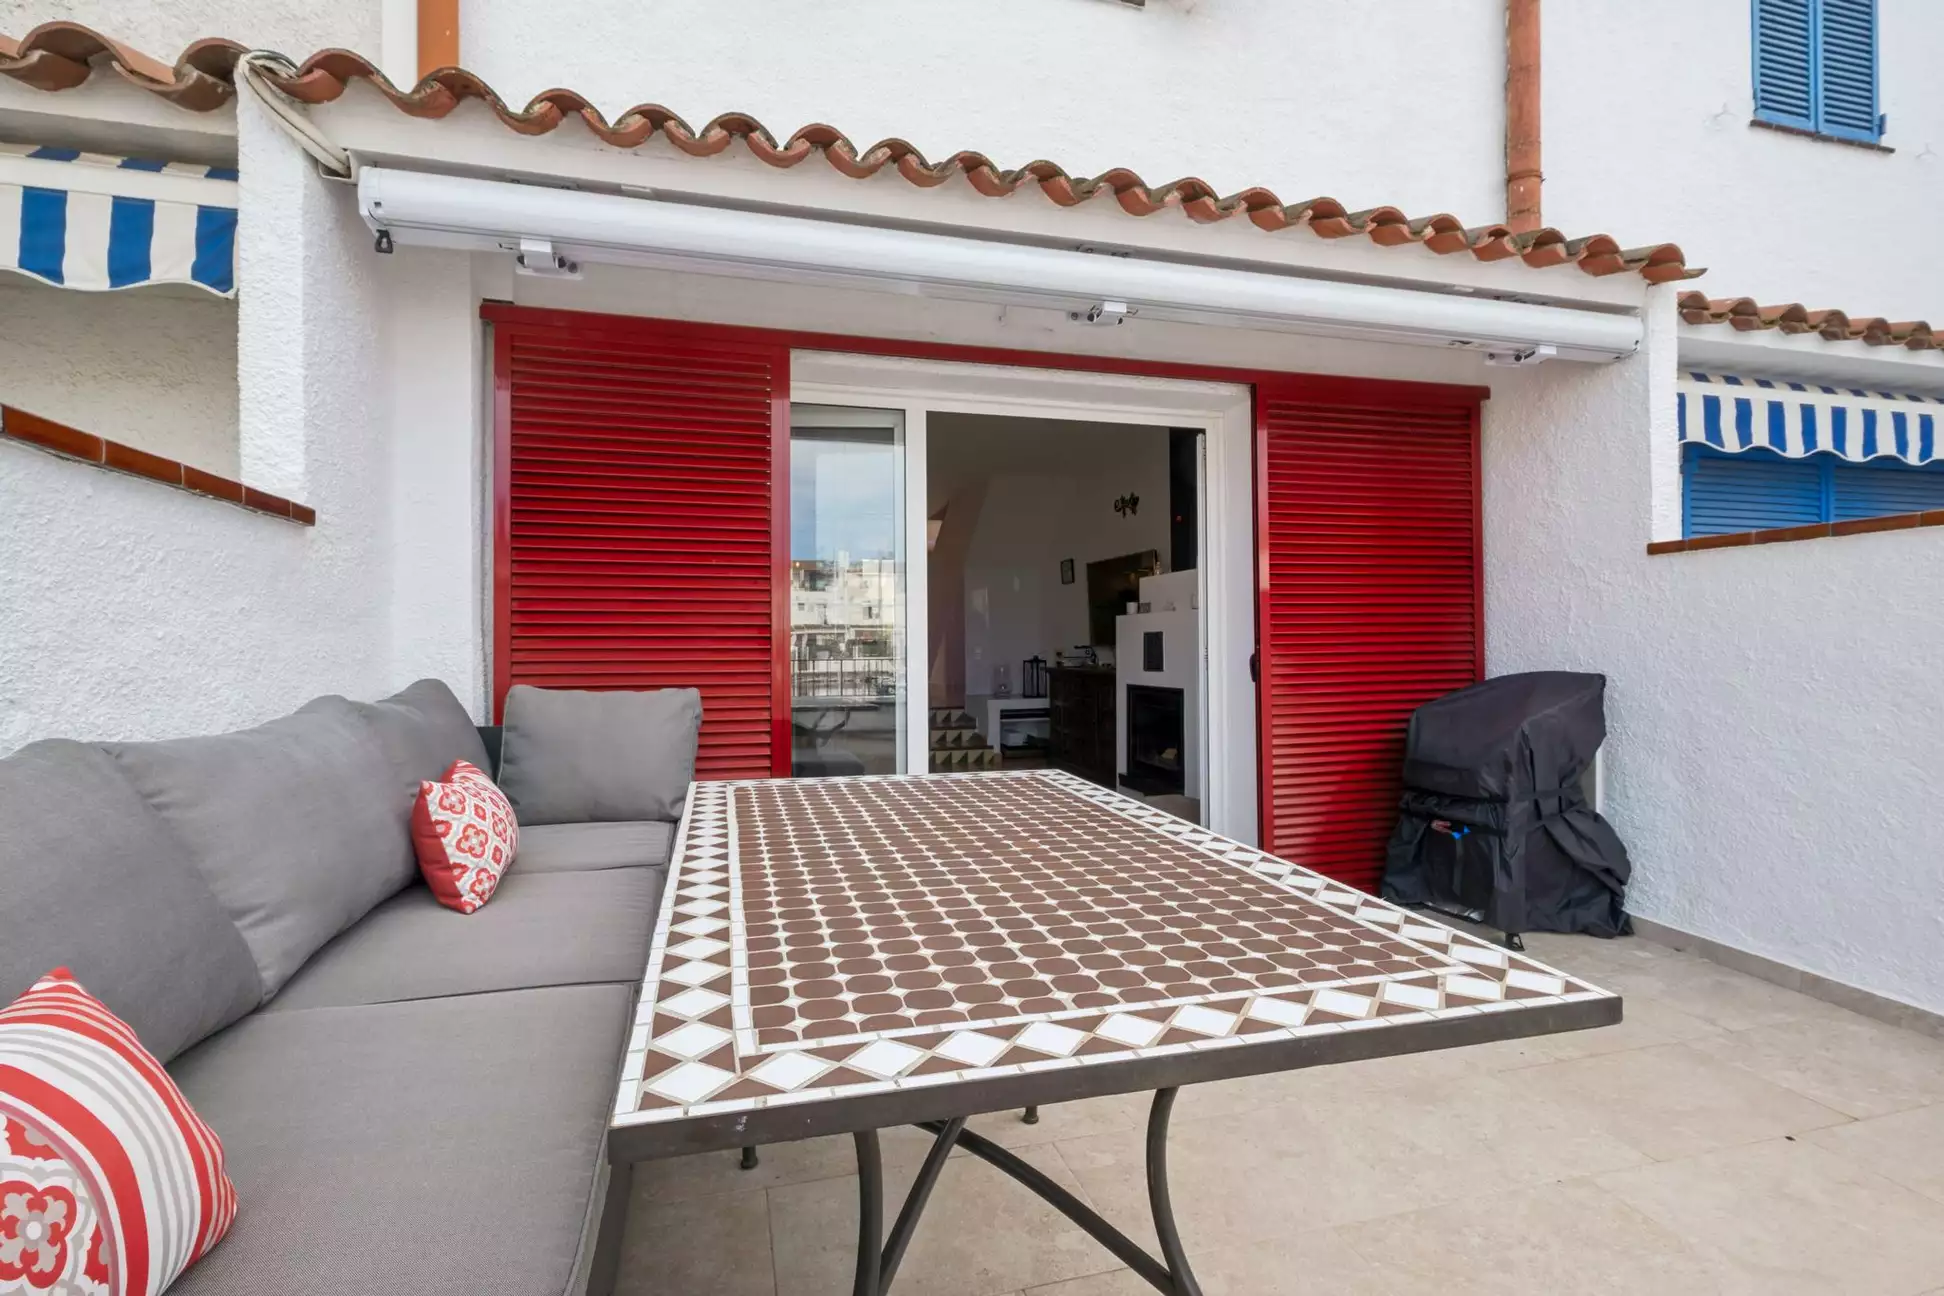 Empuriabrava, renovated traditional fisherman's house with sensational views of two private ports an